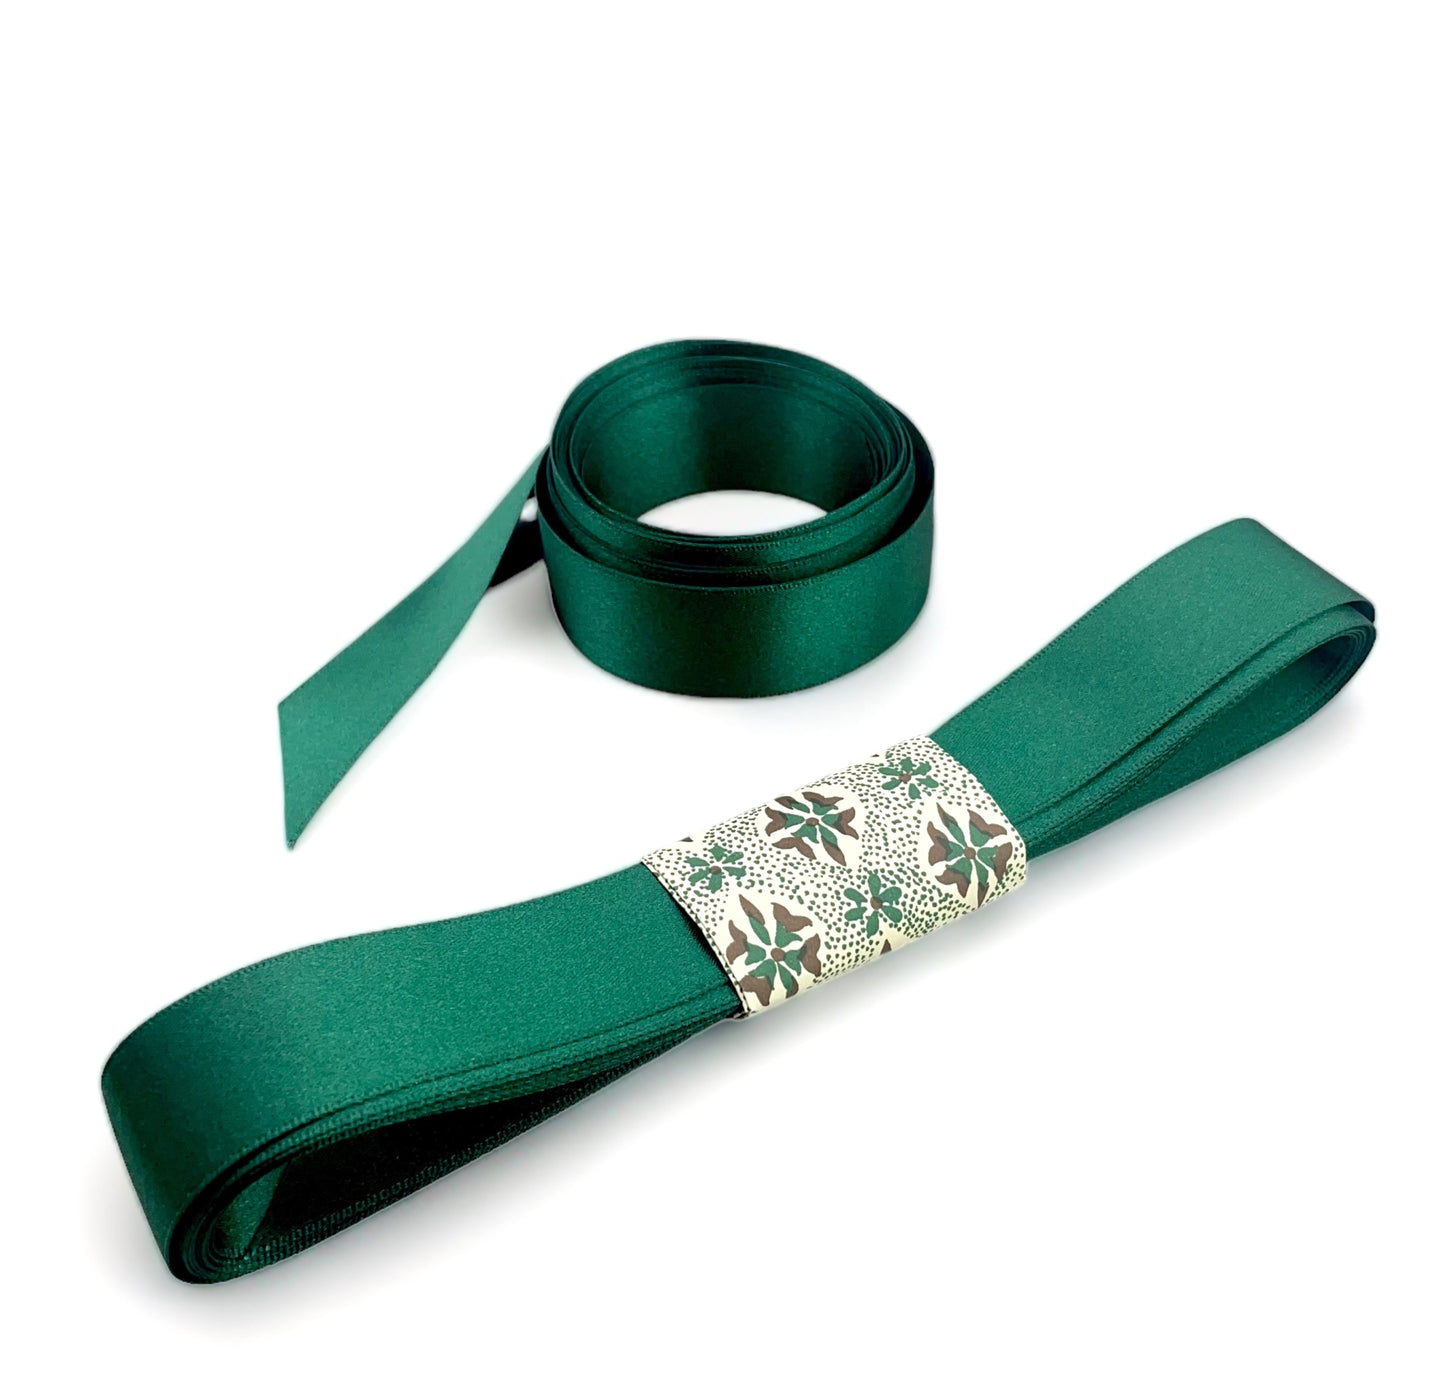 Satin ribbon 25mm wide and 5 metres long, presented with a patterned paper band. colour - forest green